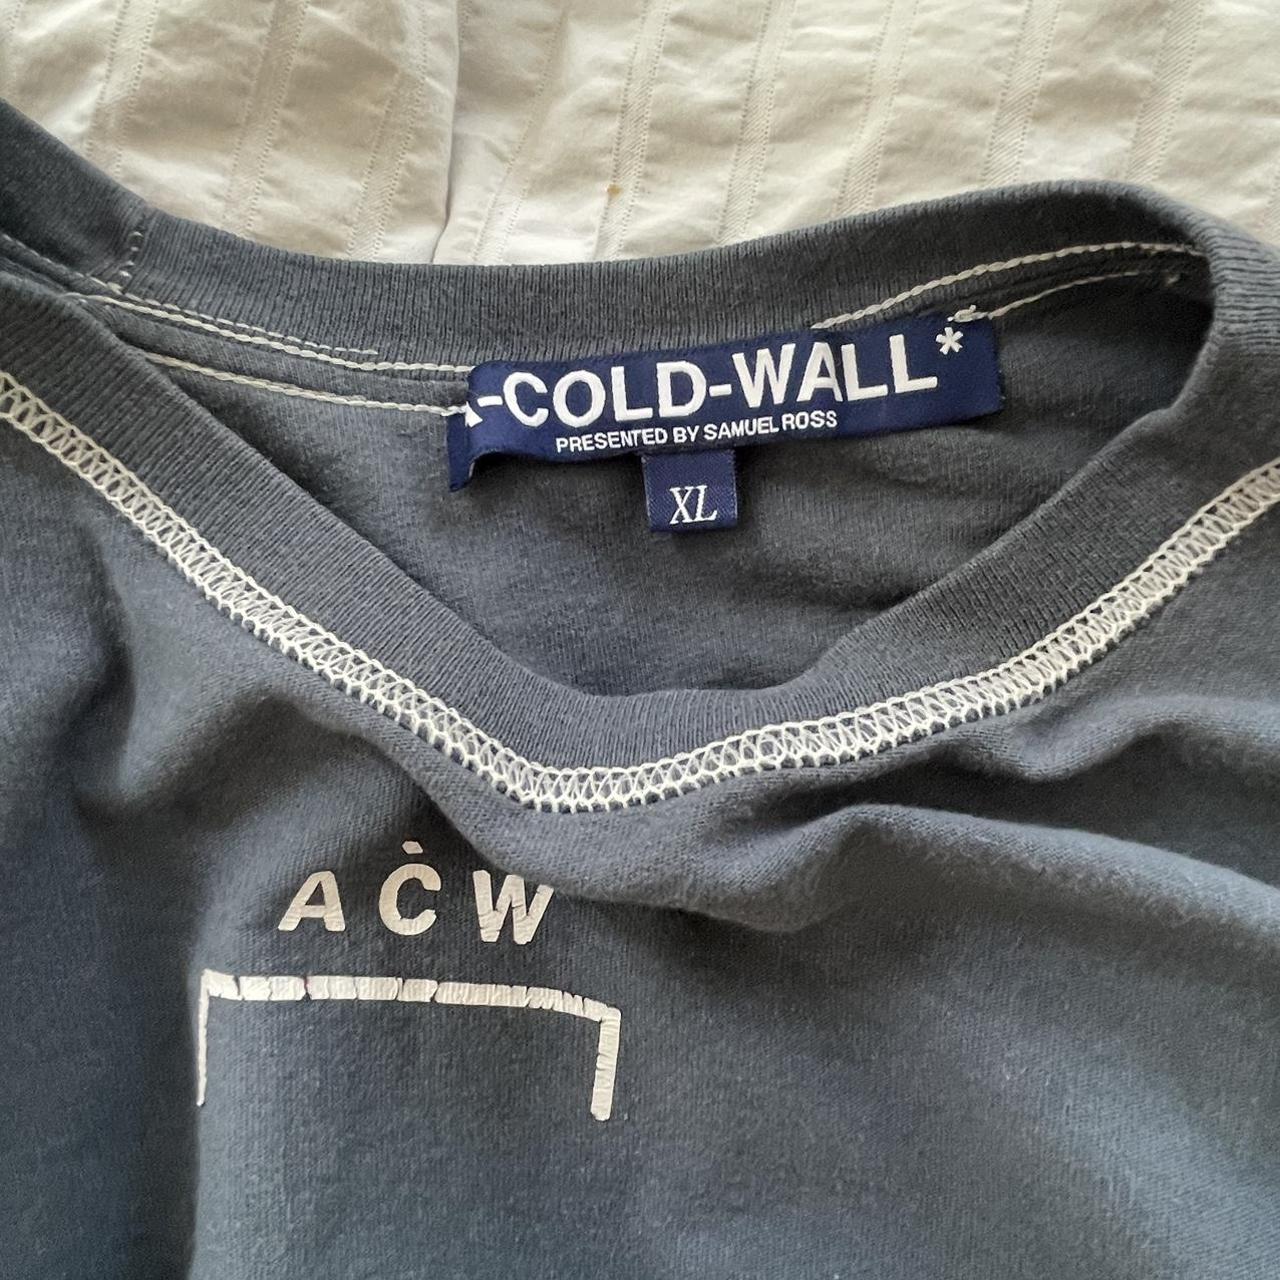 A-COLD-WALL Men's Blue and White T-shirt (6)